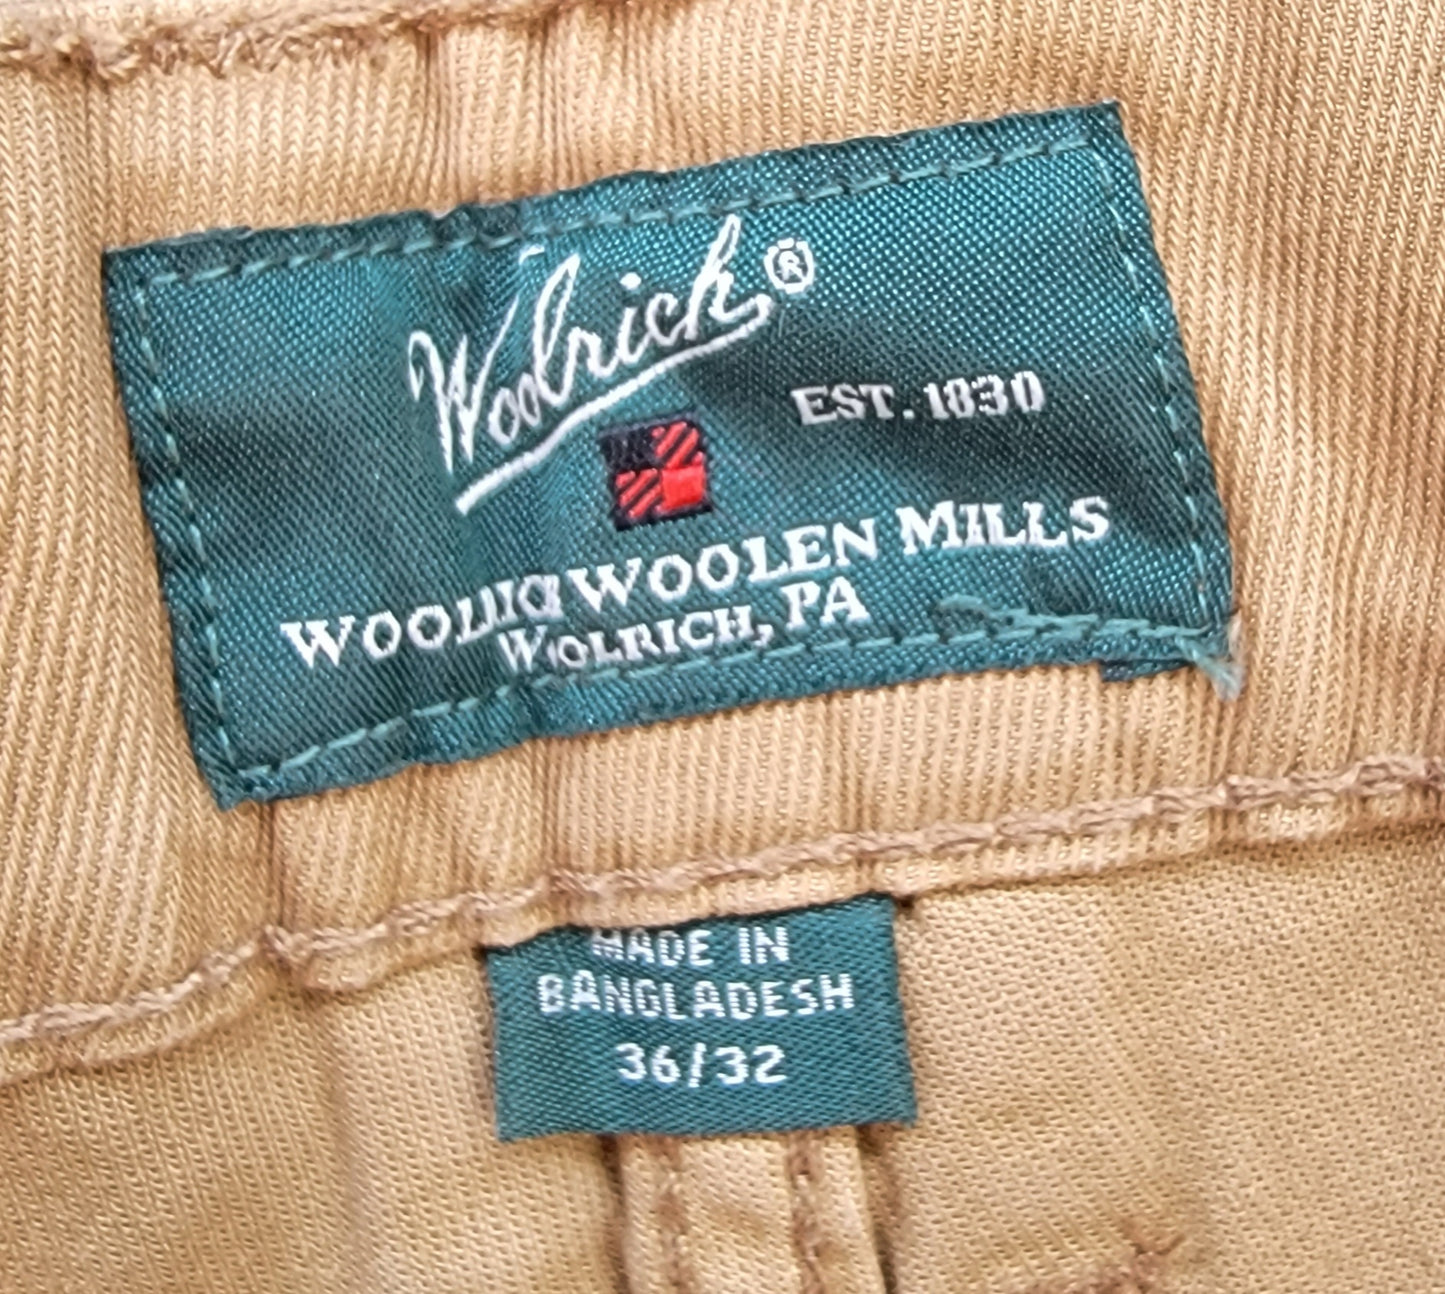 Woolrich Men's 5 Pocket Pant, Color Otter, Size 36X32 Retail $98.00 New with Tags